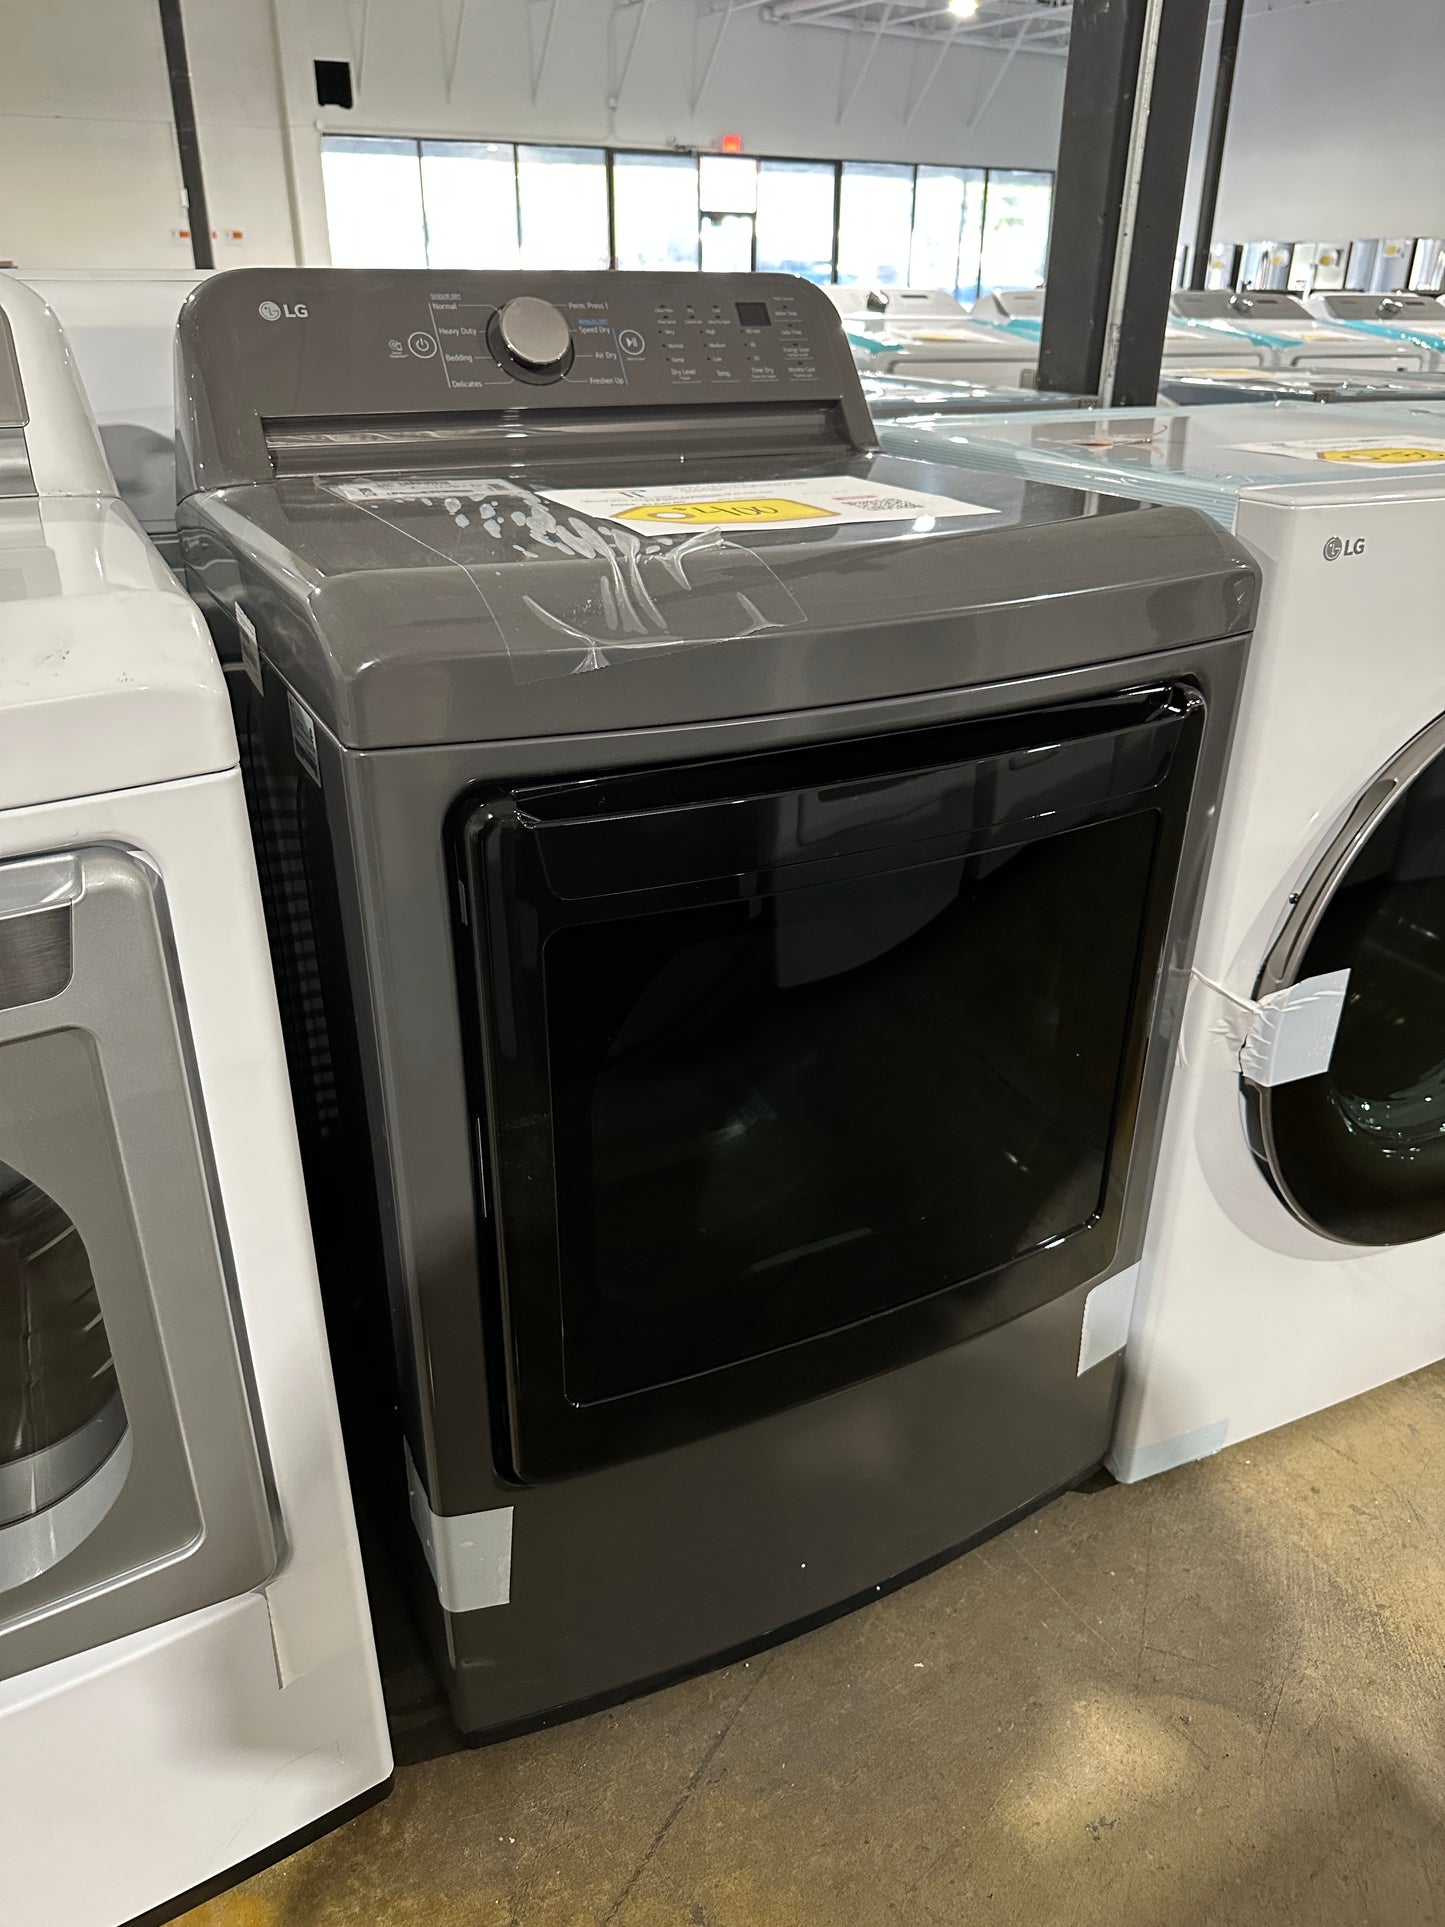 NEW LG MIDDLE BLACK ELECTRIC DRYER MODEL: DLE7150M  DRY11927S